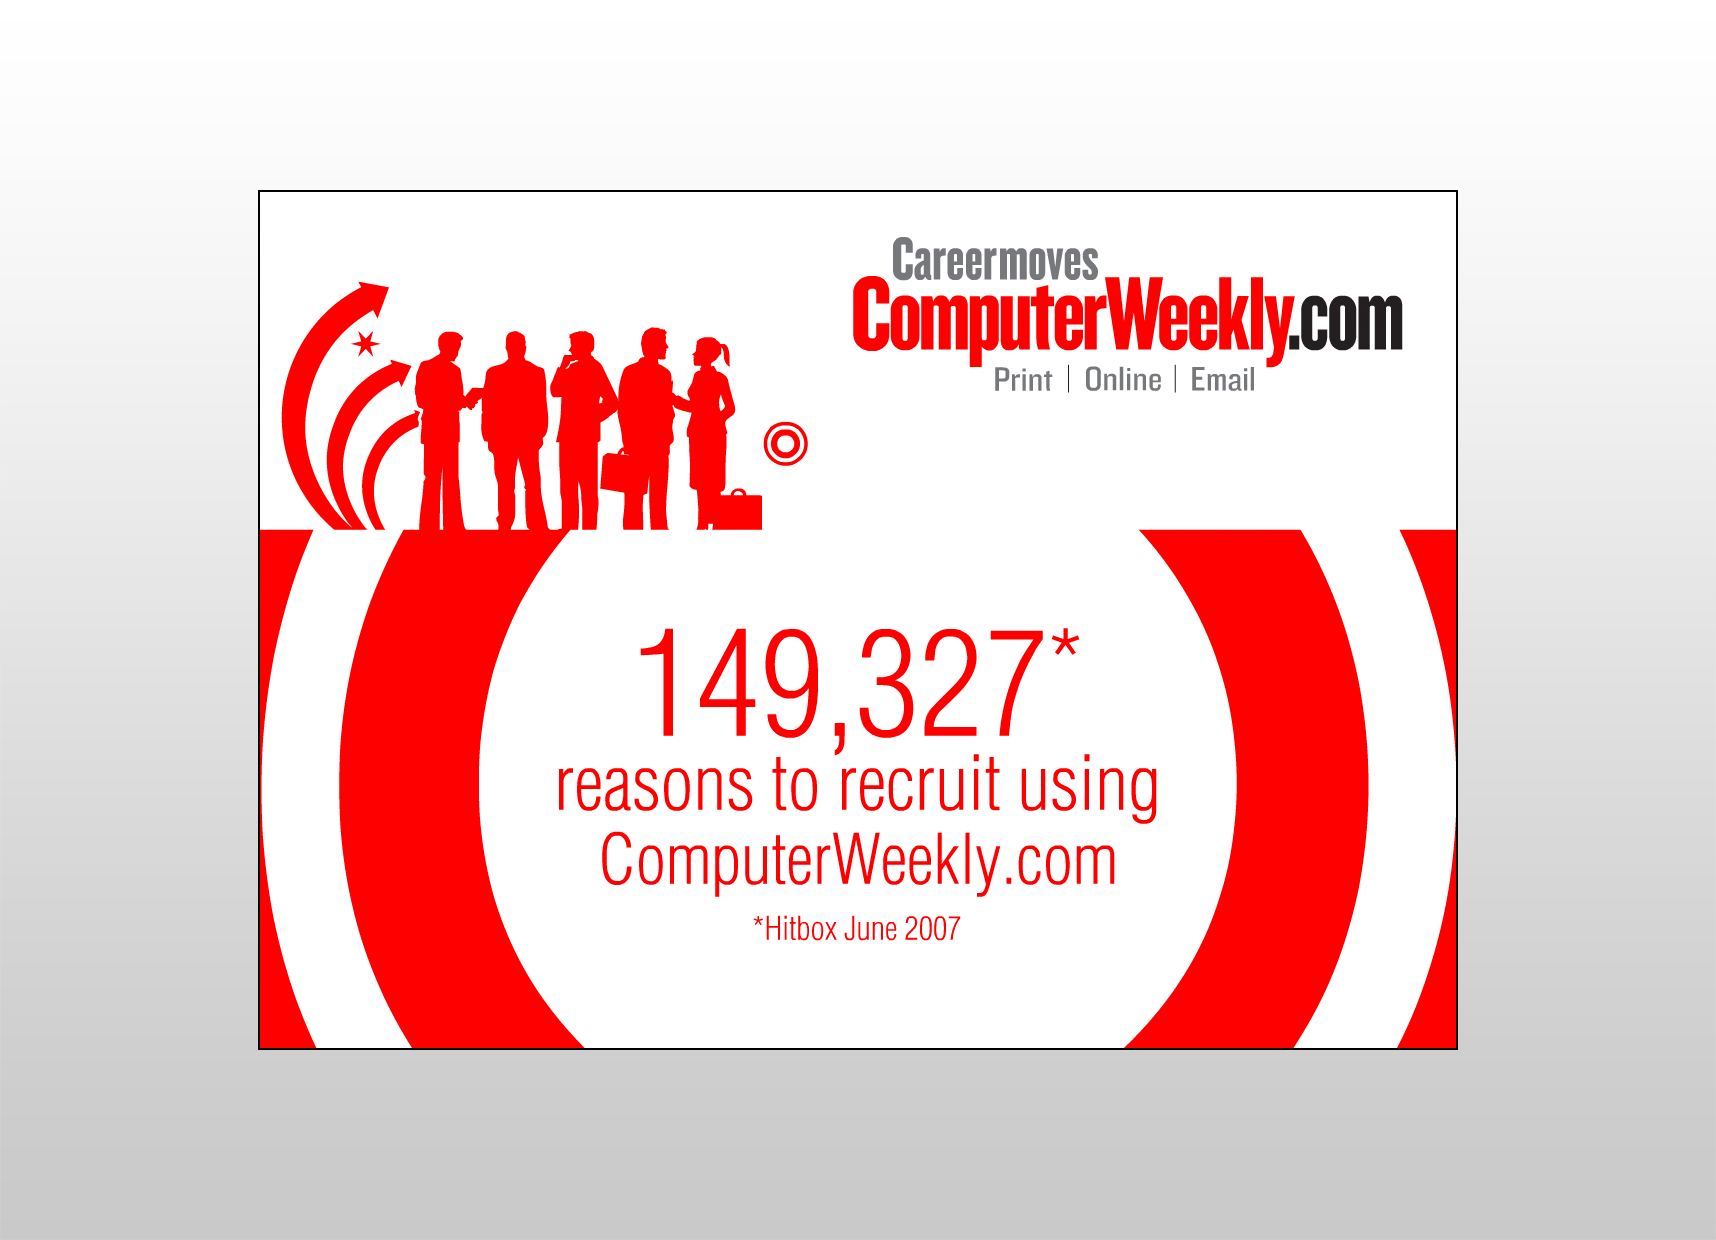 Computer Weekly Recruitment - What Media Ad